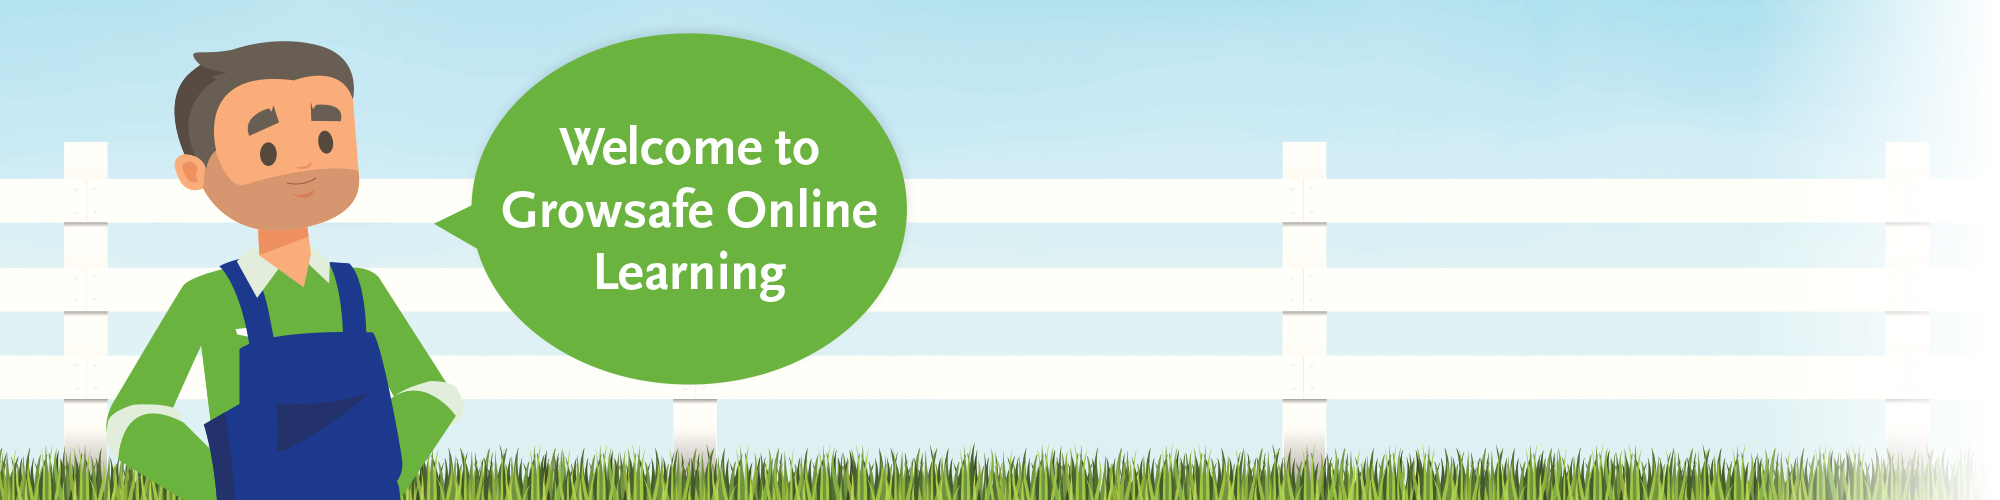 Welcome to Growsafe Online Learning